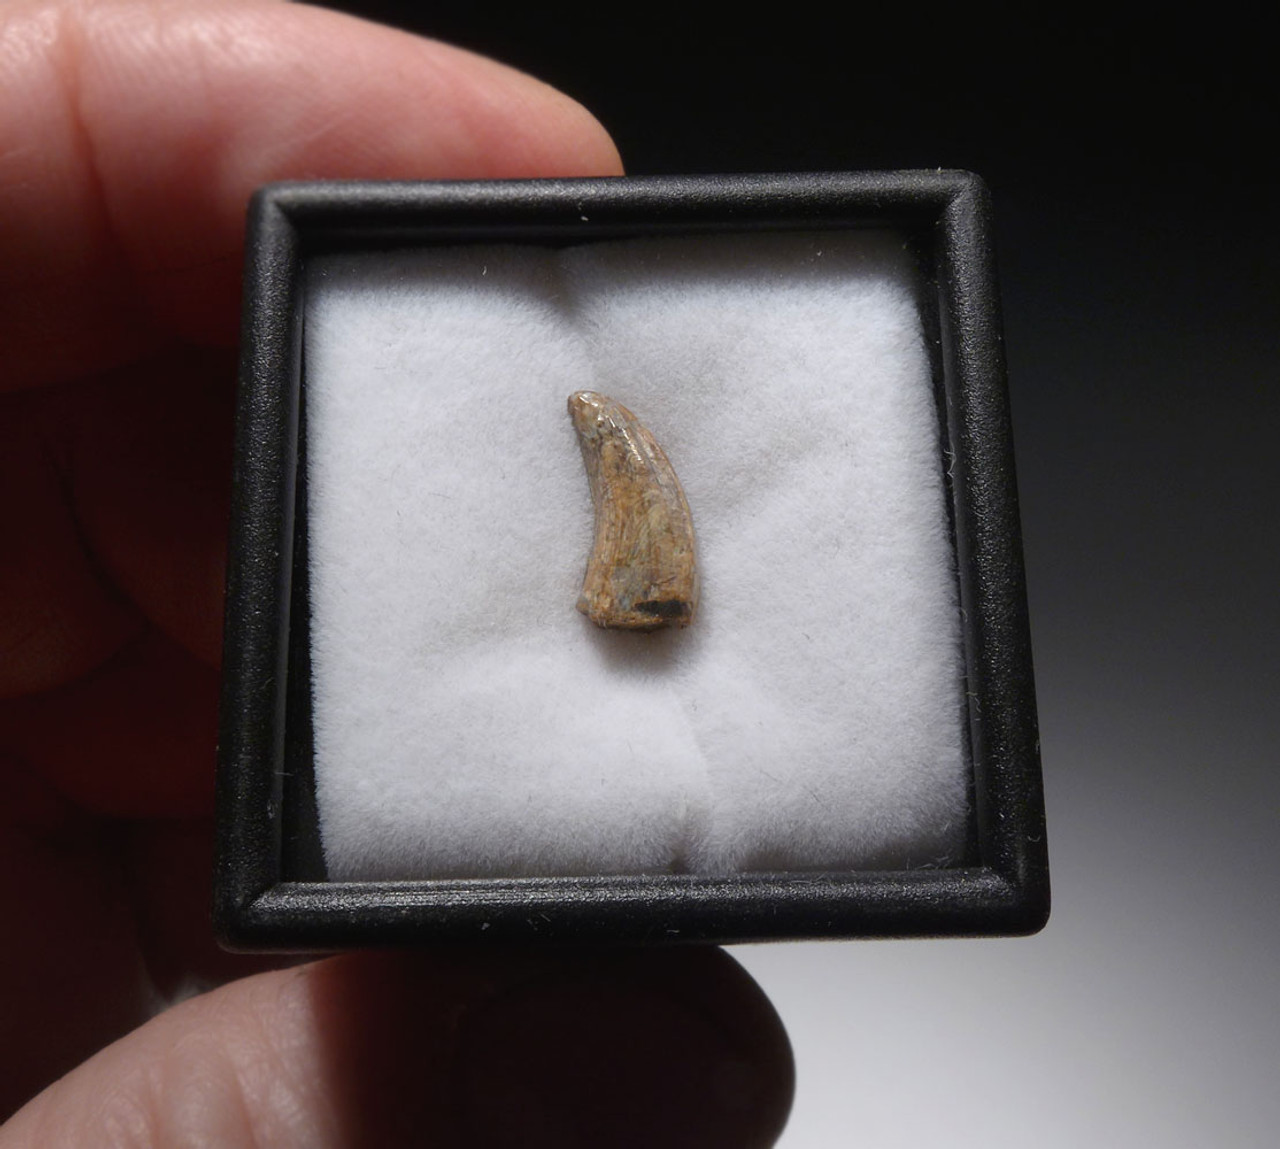 CREAM WHITE FOSSIL DROMAEOSAURUS 'RAPTOR' DINOSAUR TOOTH FROM THE JUDITH RIVER FORMATION  *DT6-187